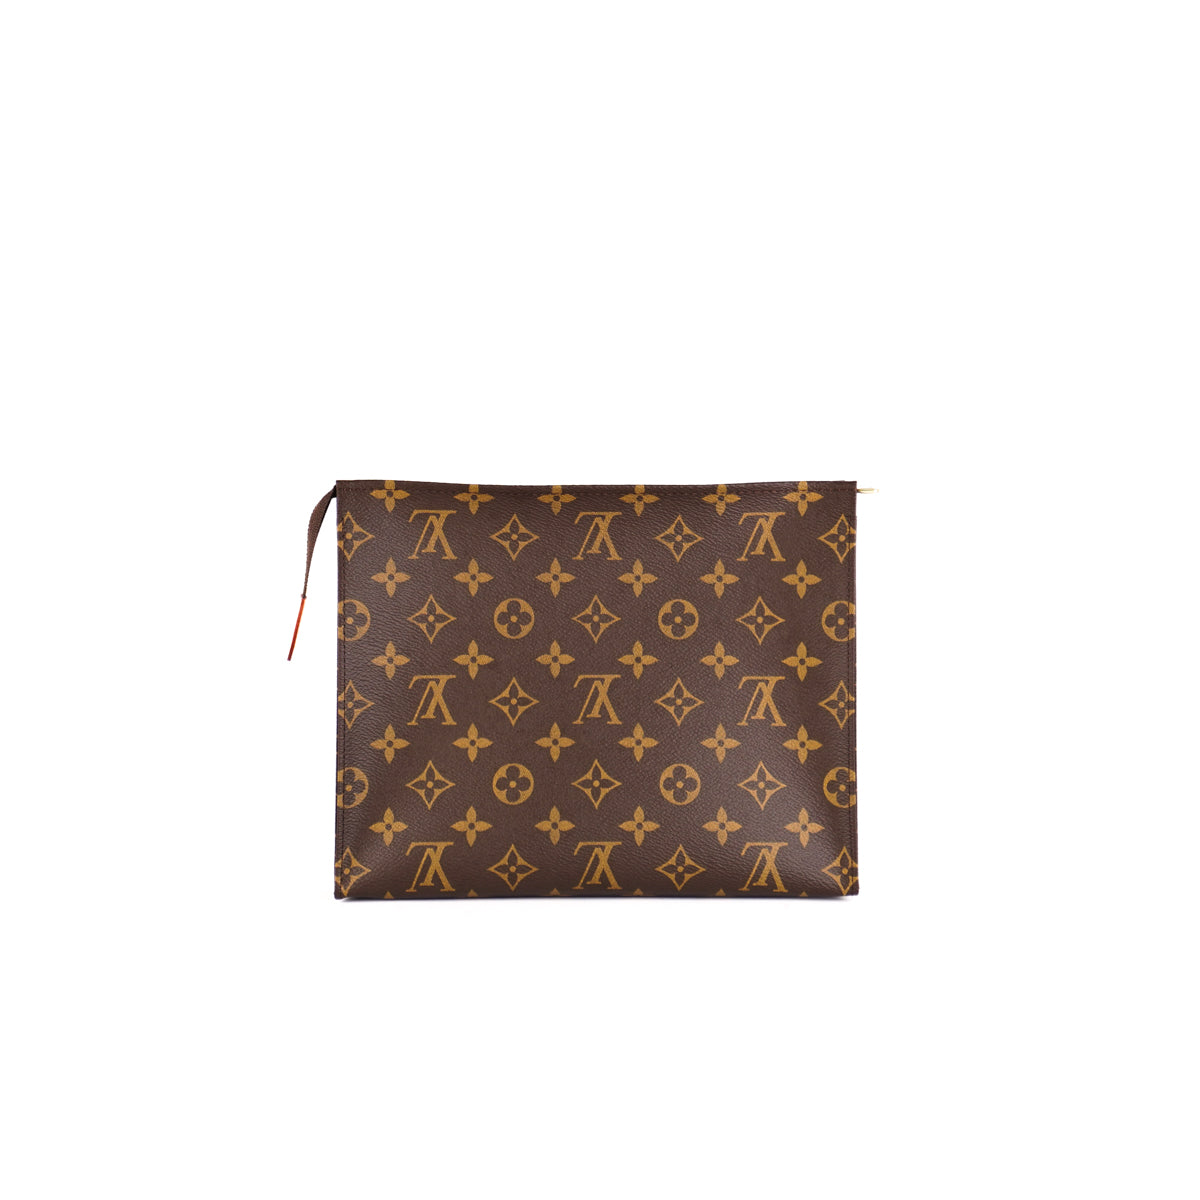 🔥NEW LOUIS VUITTON TOILETRY POUCH 26 Large Monogram Clutch Bag ❤️ HOT GIFT